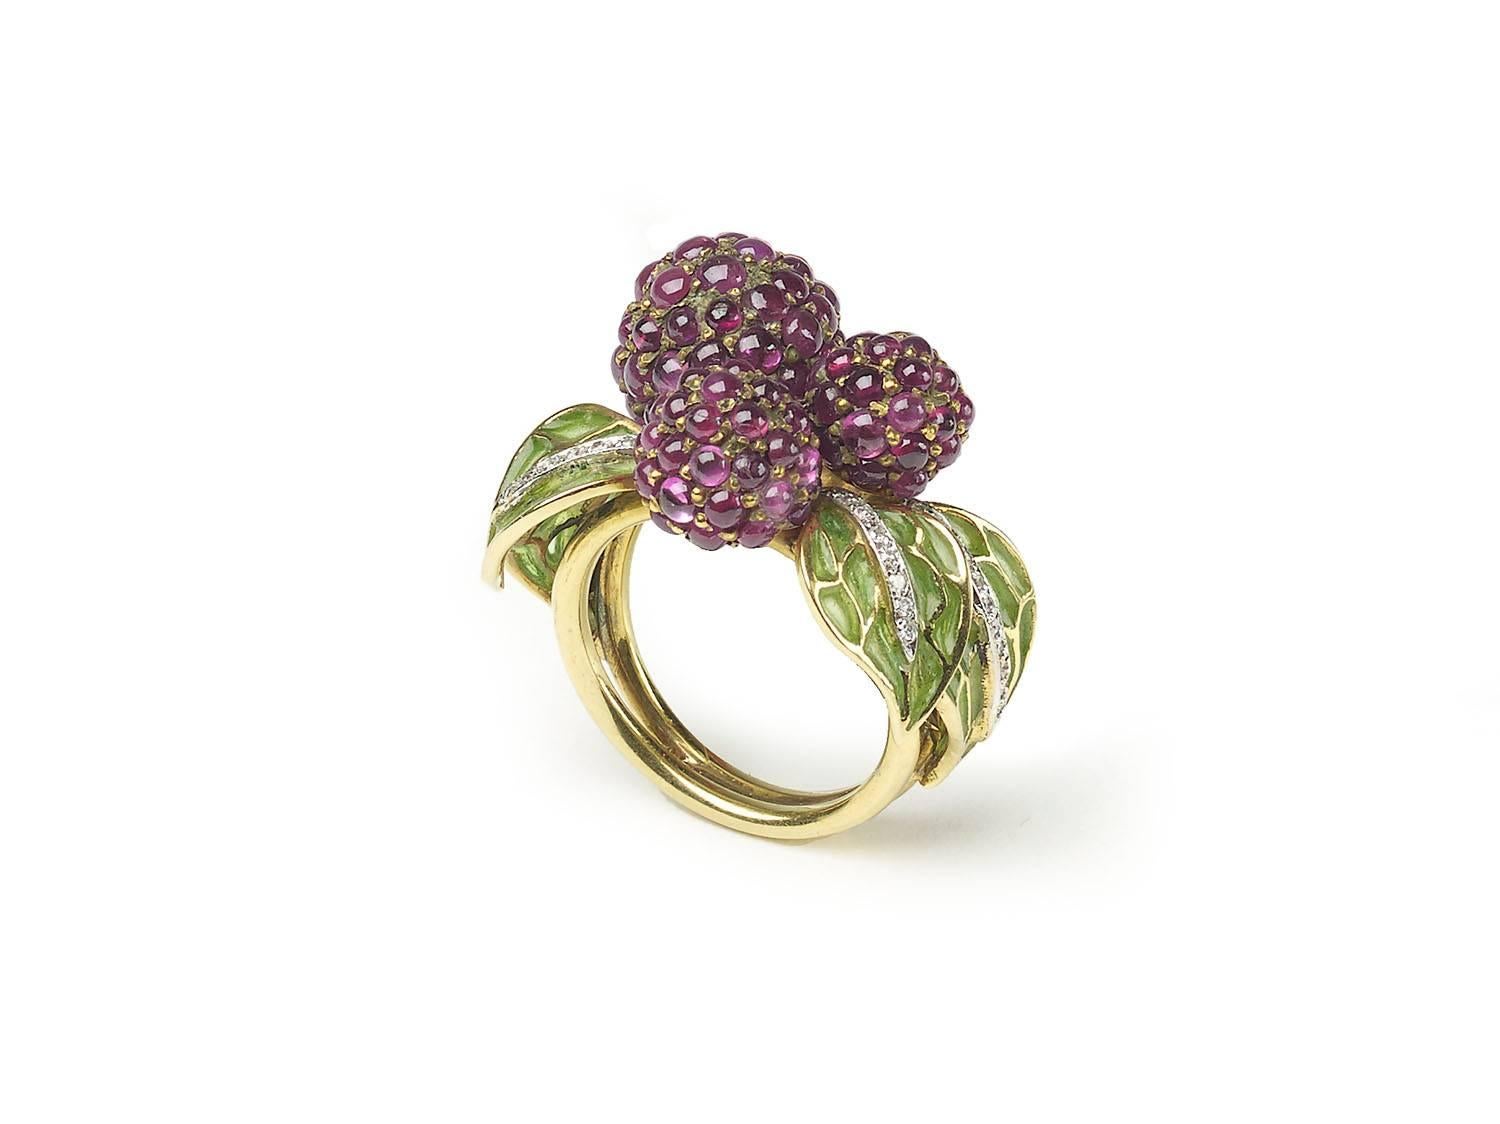 A ruby, enamel and diamond raspberry ring, with three central raspberries, pavé set with cabochon-cut rubies, with green plique à jour enamel leaves, with diamond detail, mounted in yellow gold.

Finger size UK M / US 6.